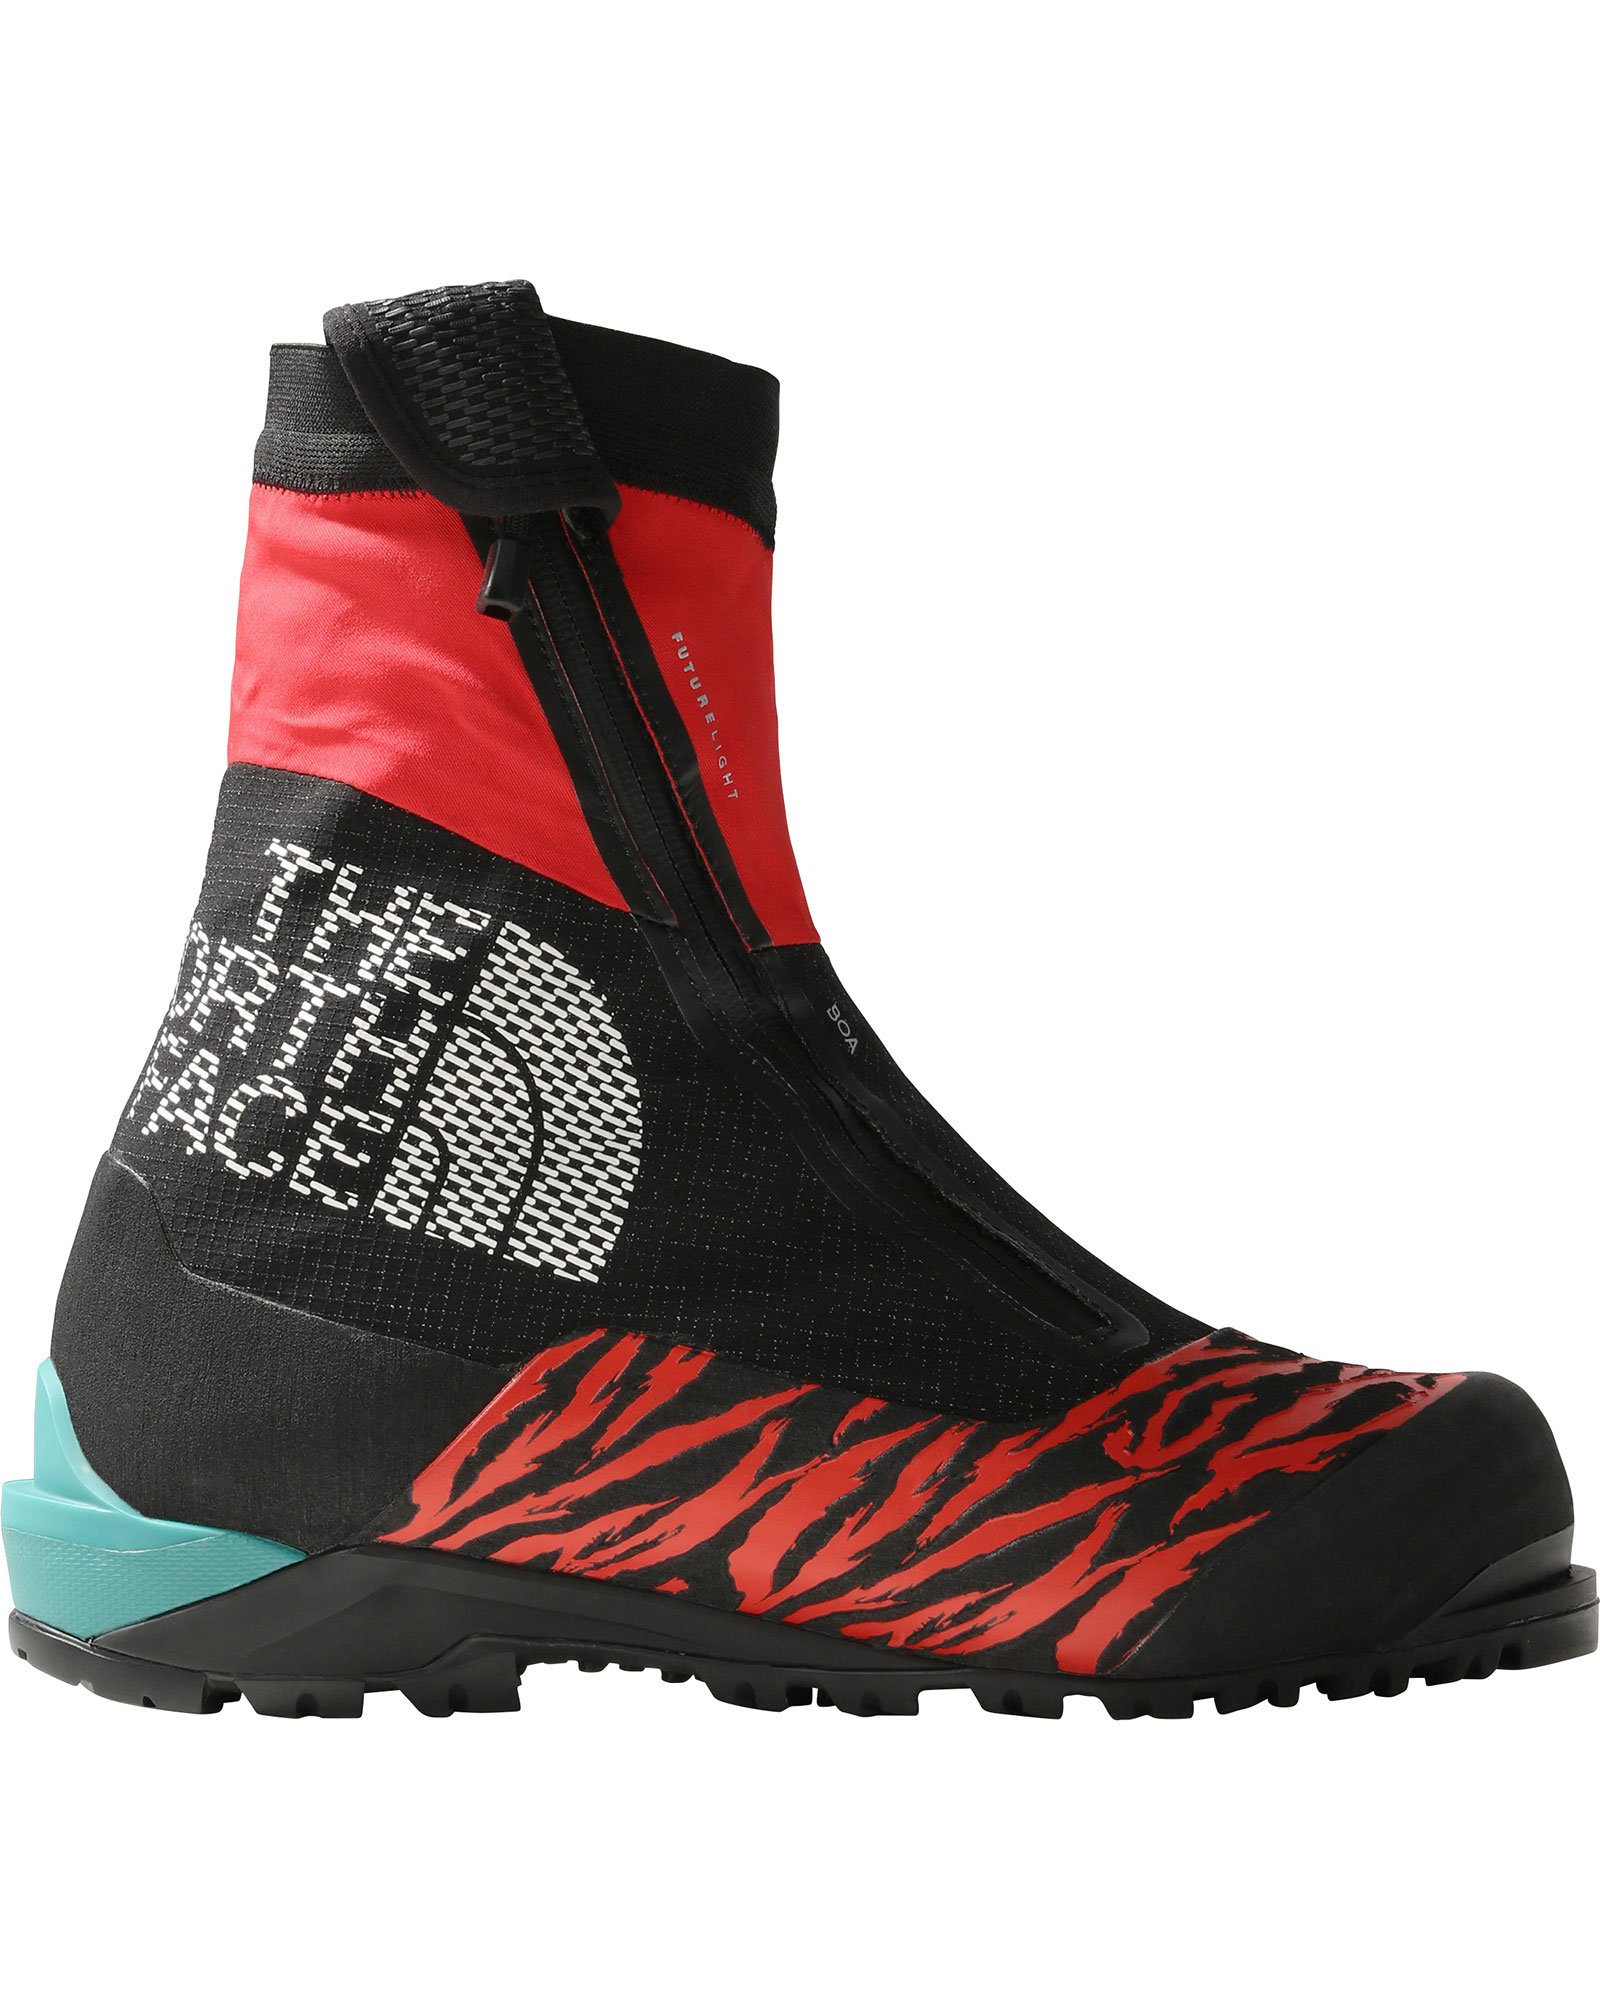 The North Face Summit Torre Egger Futurelight Boots